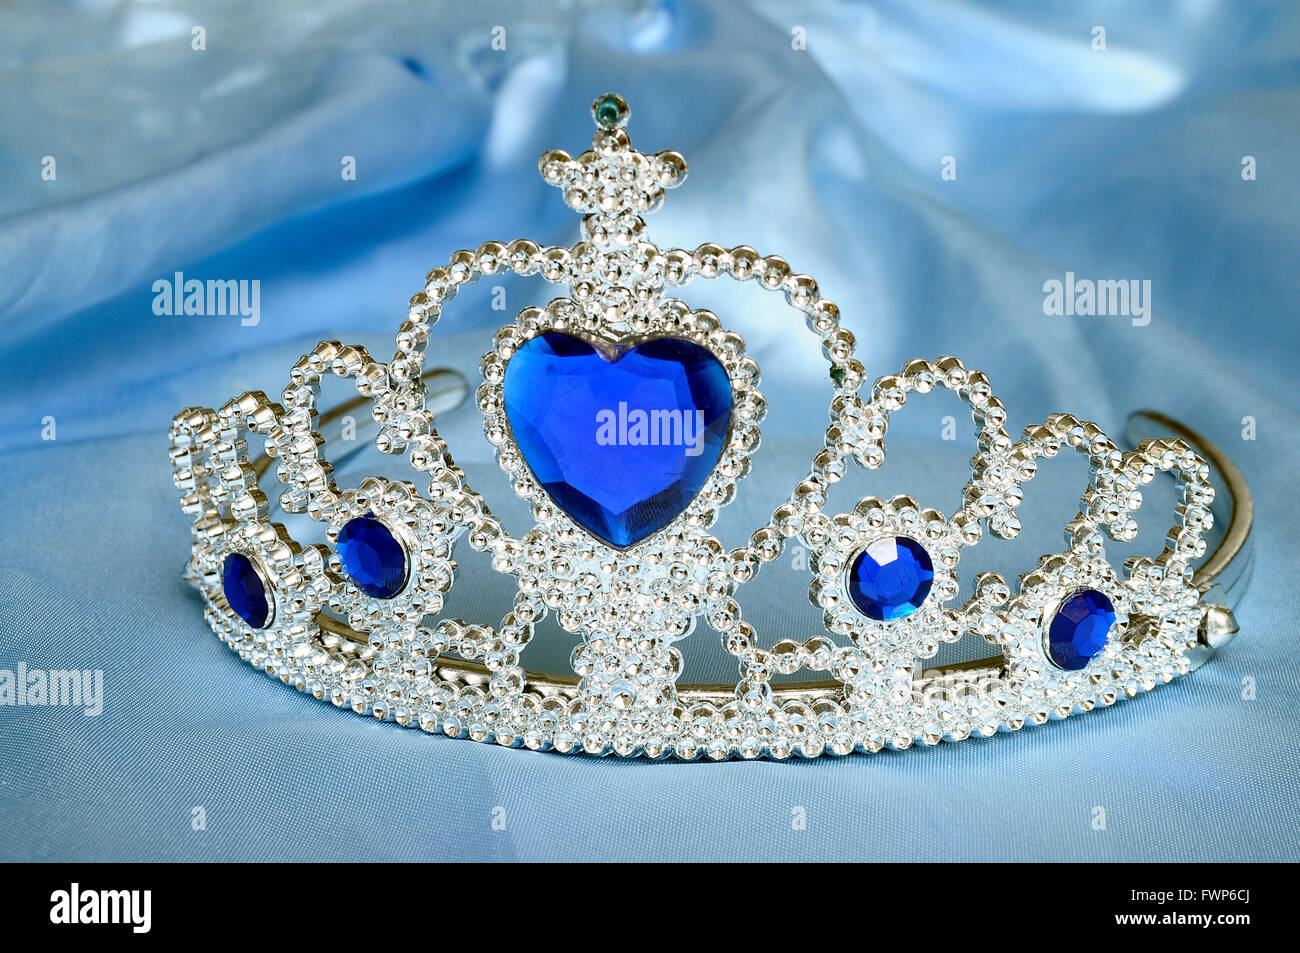 Toy tiara with diamonds and blue gem, like a princess crown, on blue satin tissue Stock Photo